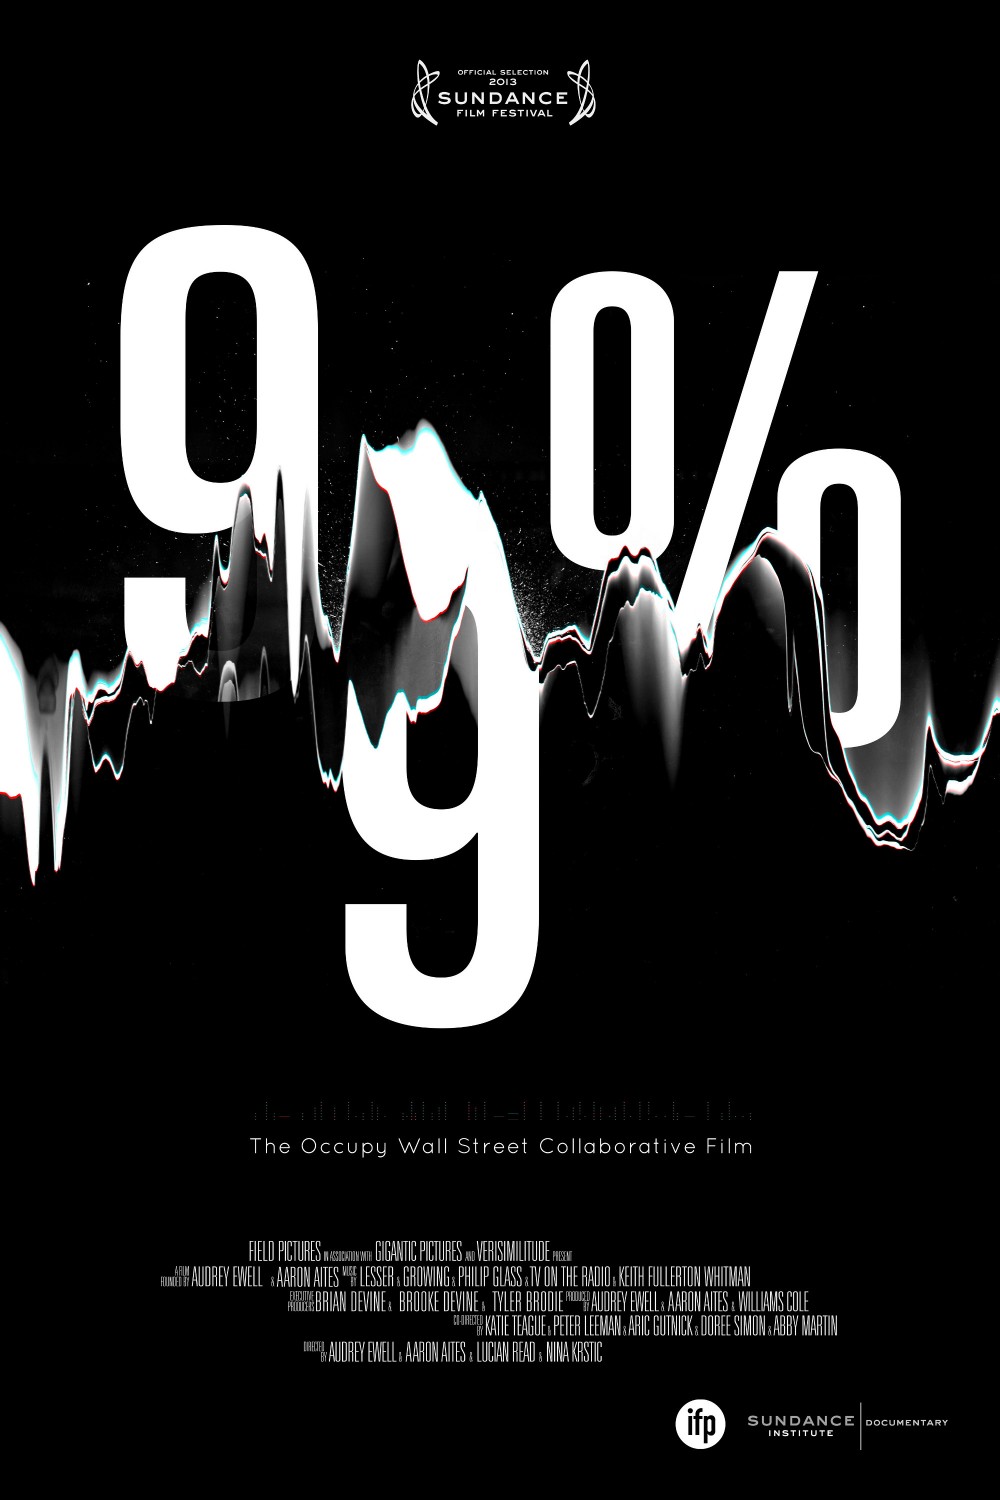 Extra Large Movie Poster Image for 99%: The Occupy Wall Street Collaborative Film (#1 of 2)